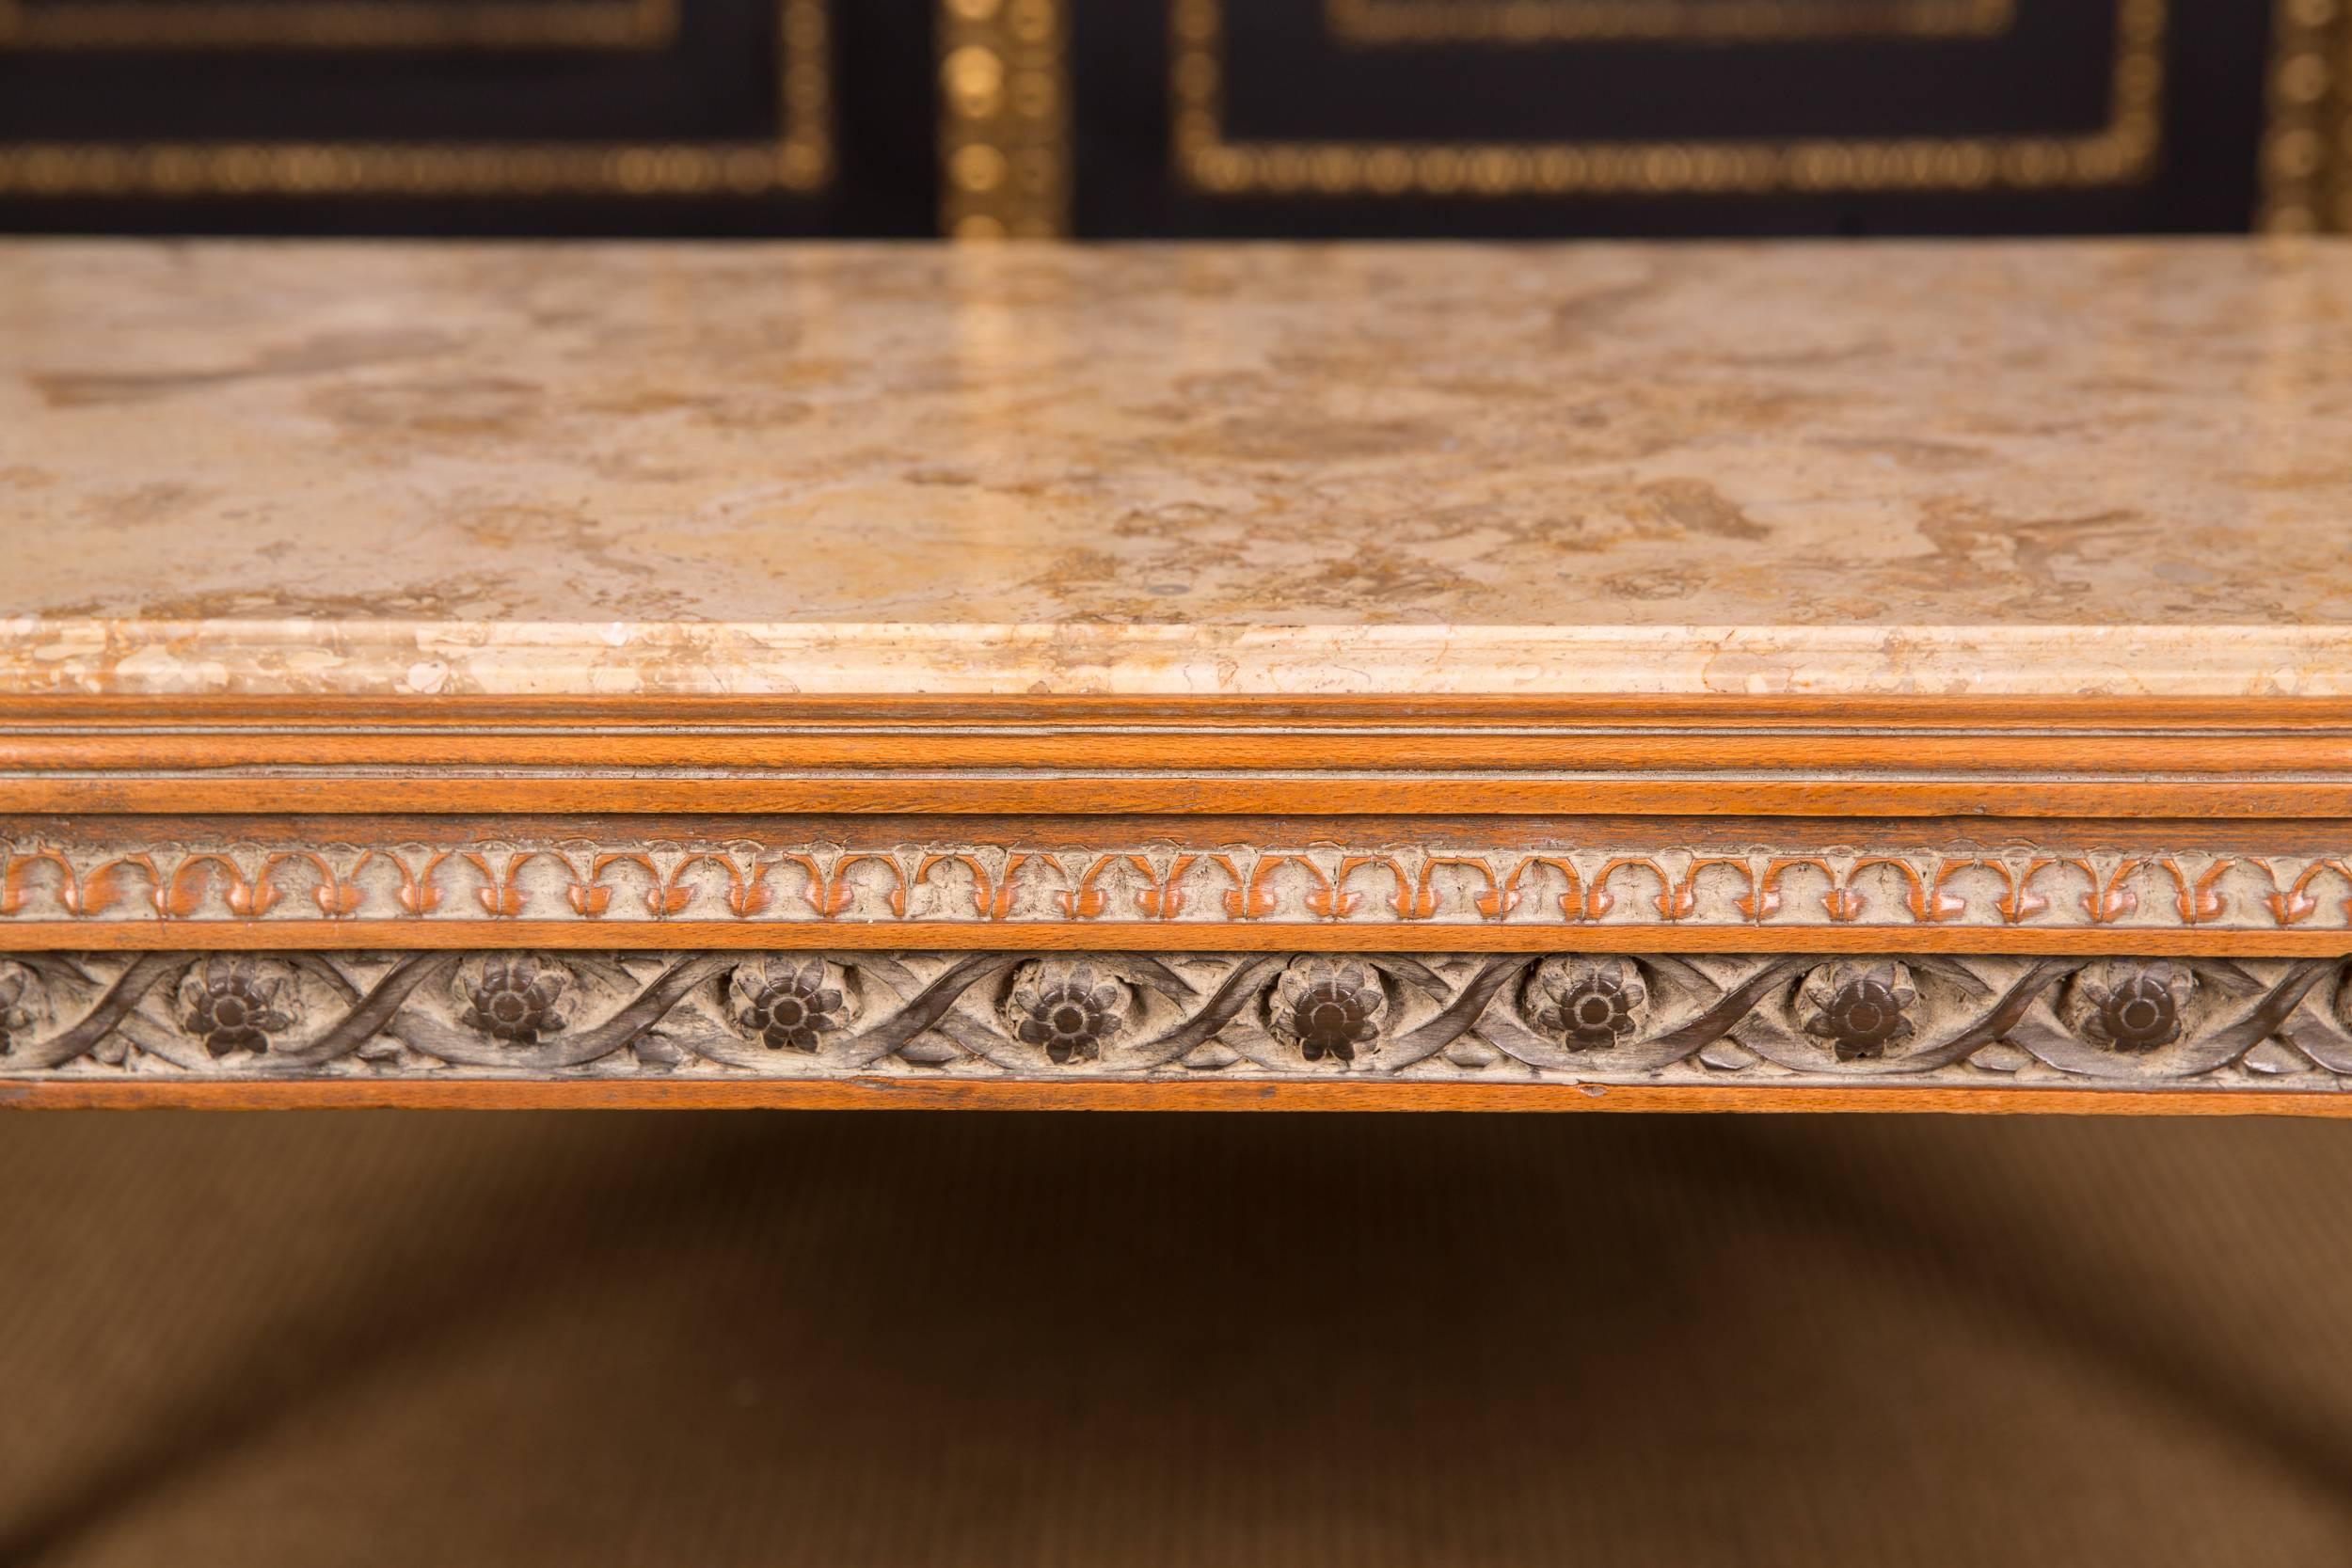 High Quality Table with Marble Top in Louis Seize Style (Louis XVI.)